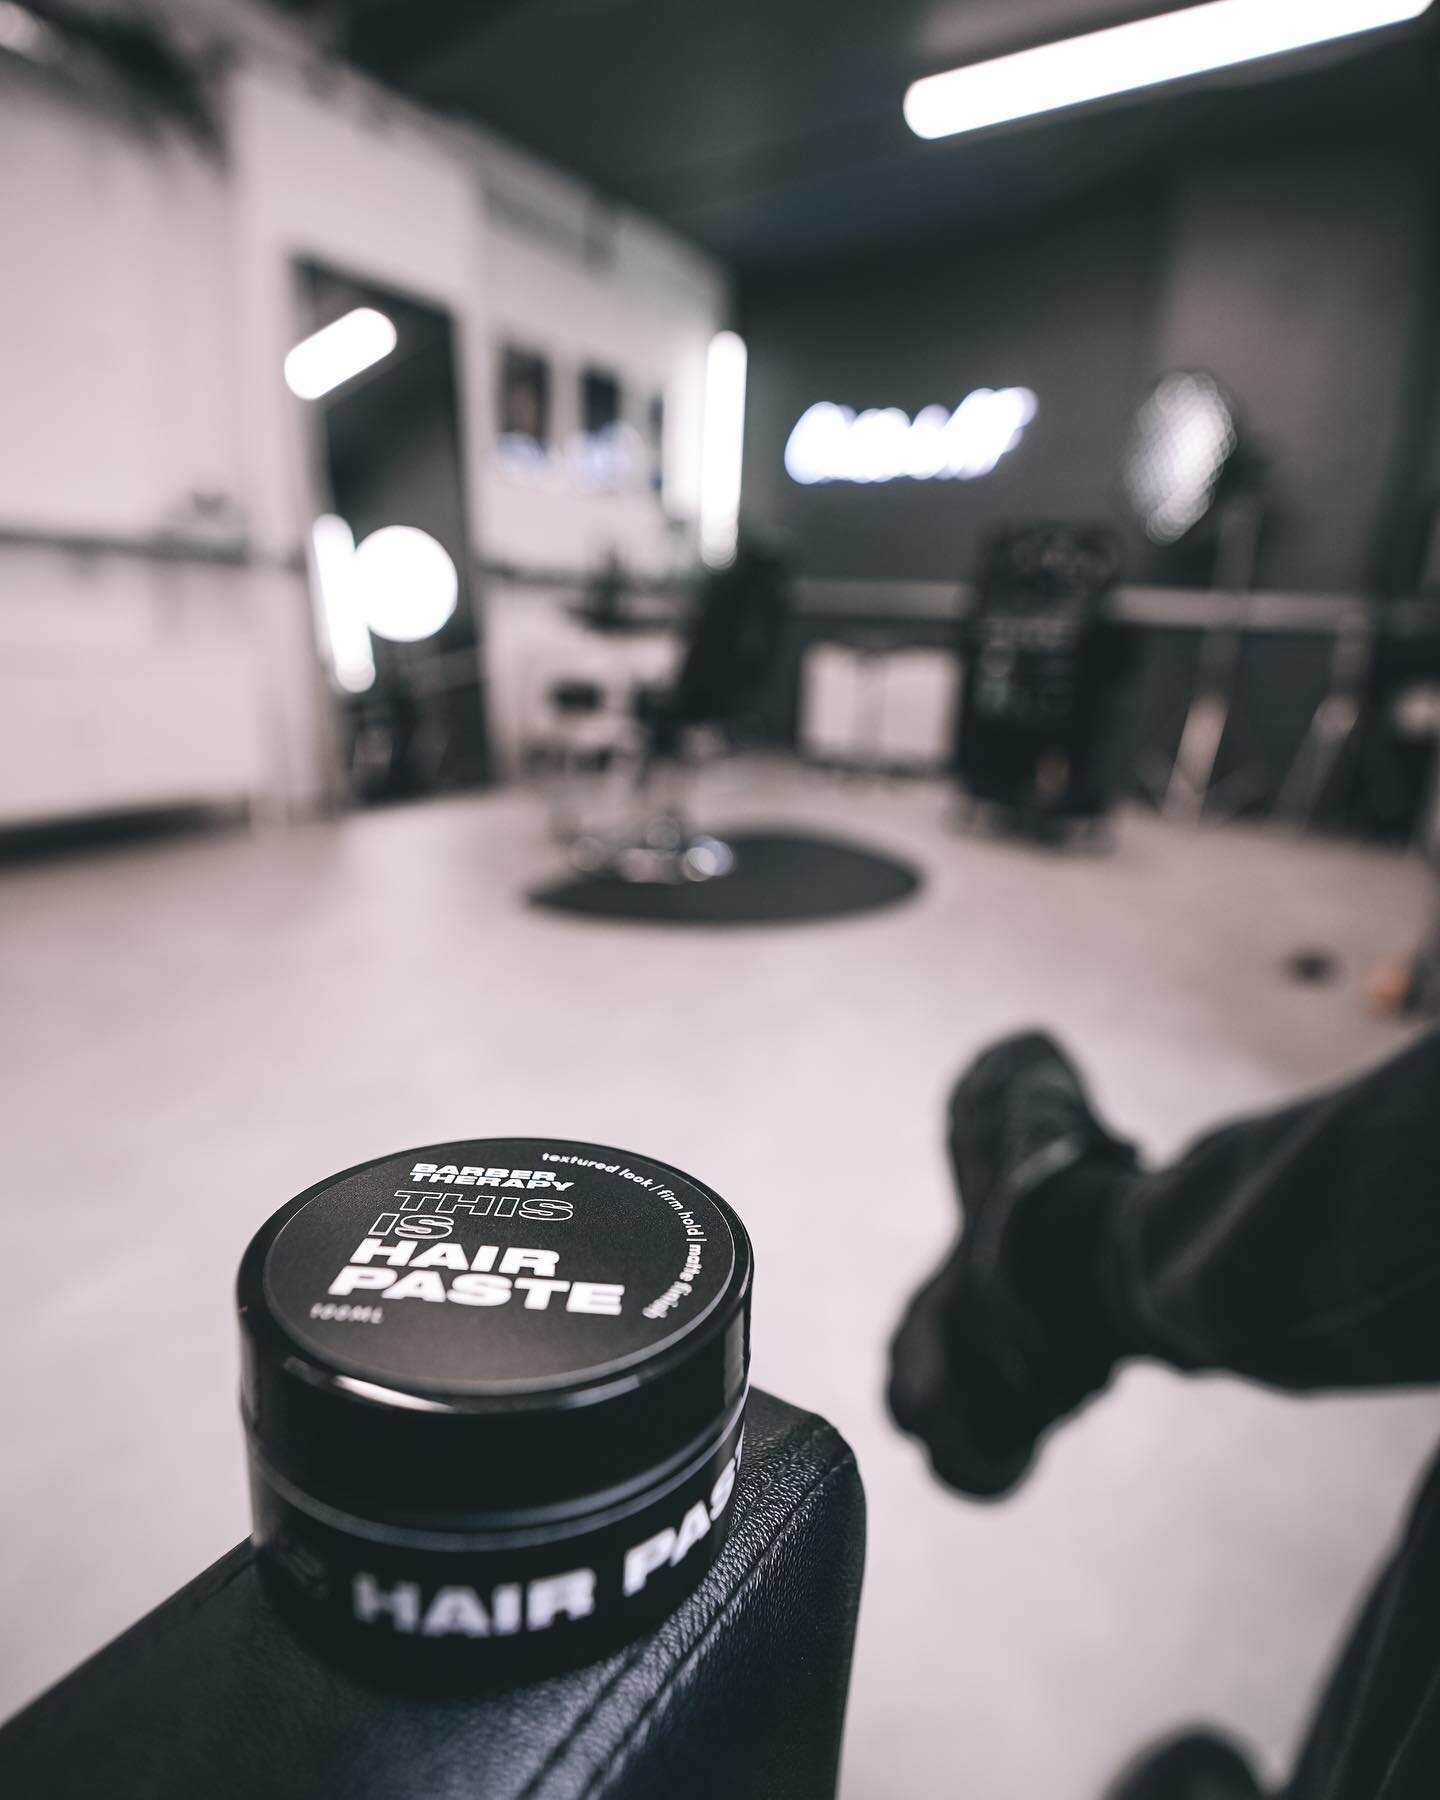 Textured Look | Firm Hold | Matte Finish (Makes you better looking)*
.
.
.
*(Cant promise anything)
.
.
#hairproduct #menshairproduct #mensstyle #hairpaste #hairstyling #mensproduct #hairdresser #paste #hairtexture #texturepaste #britishstyle #barber